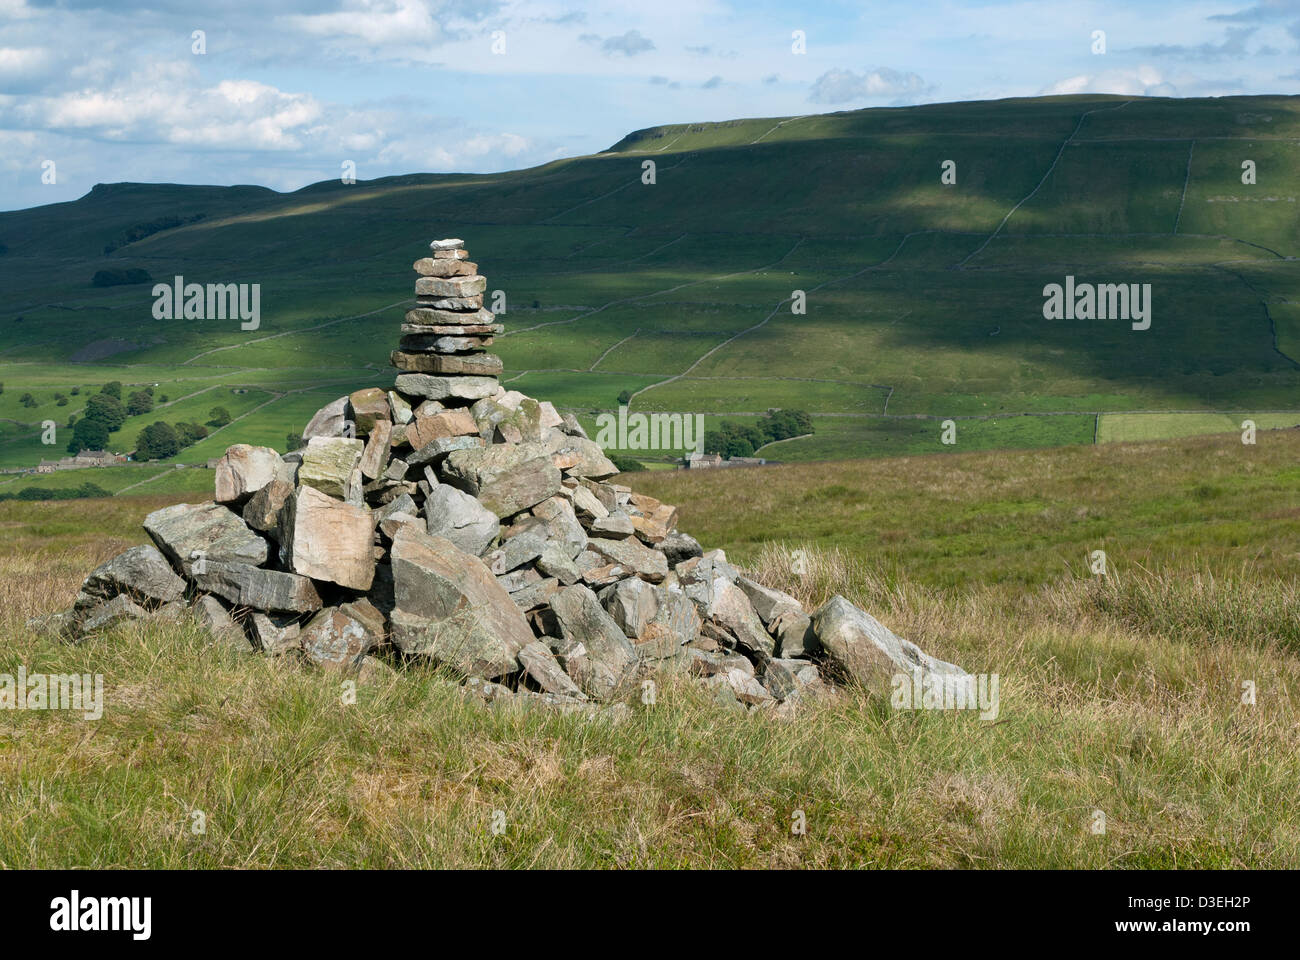 Cairn near Backsides, above Hawes, Wensleydale, Yorkshire Dales National Park, England Stock Photo